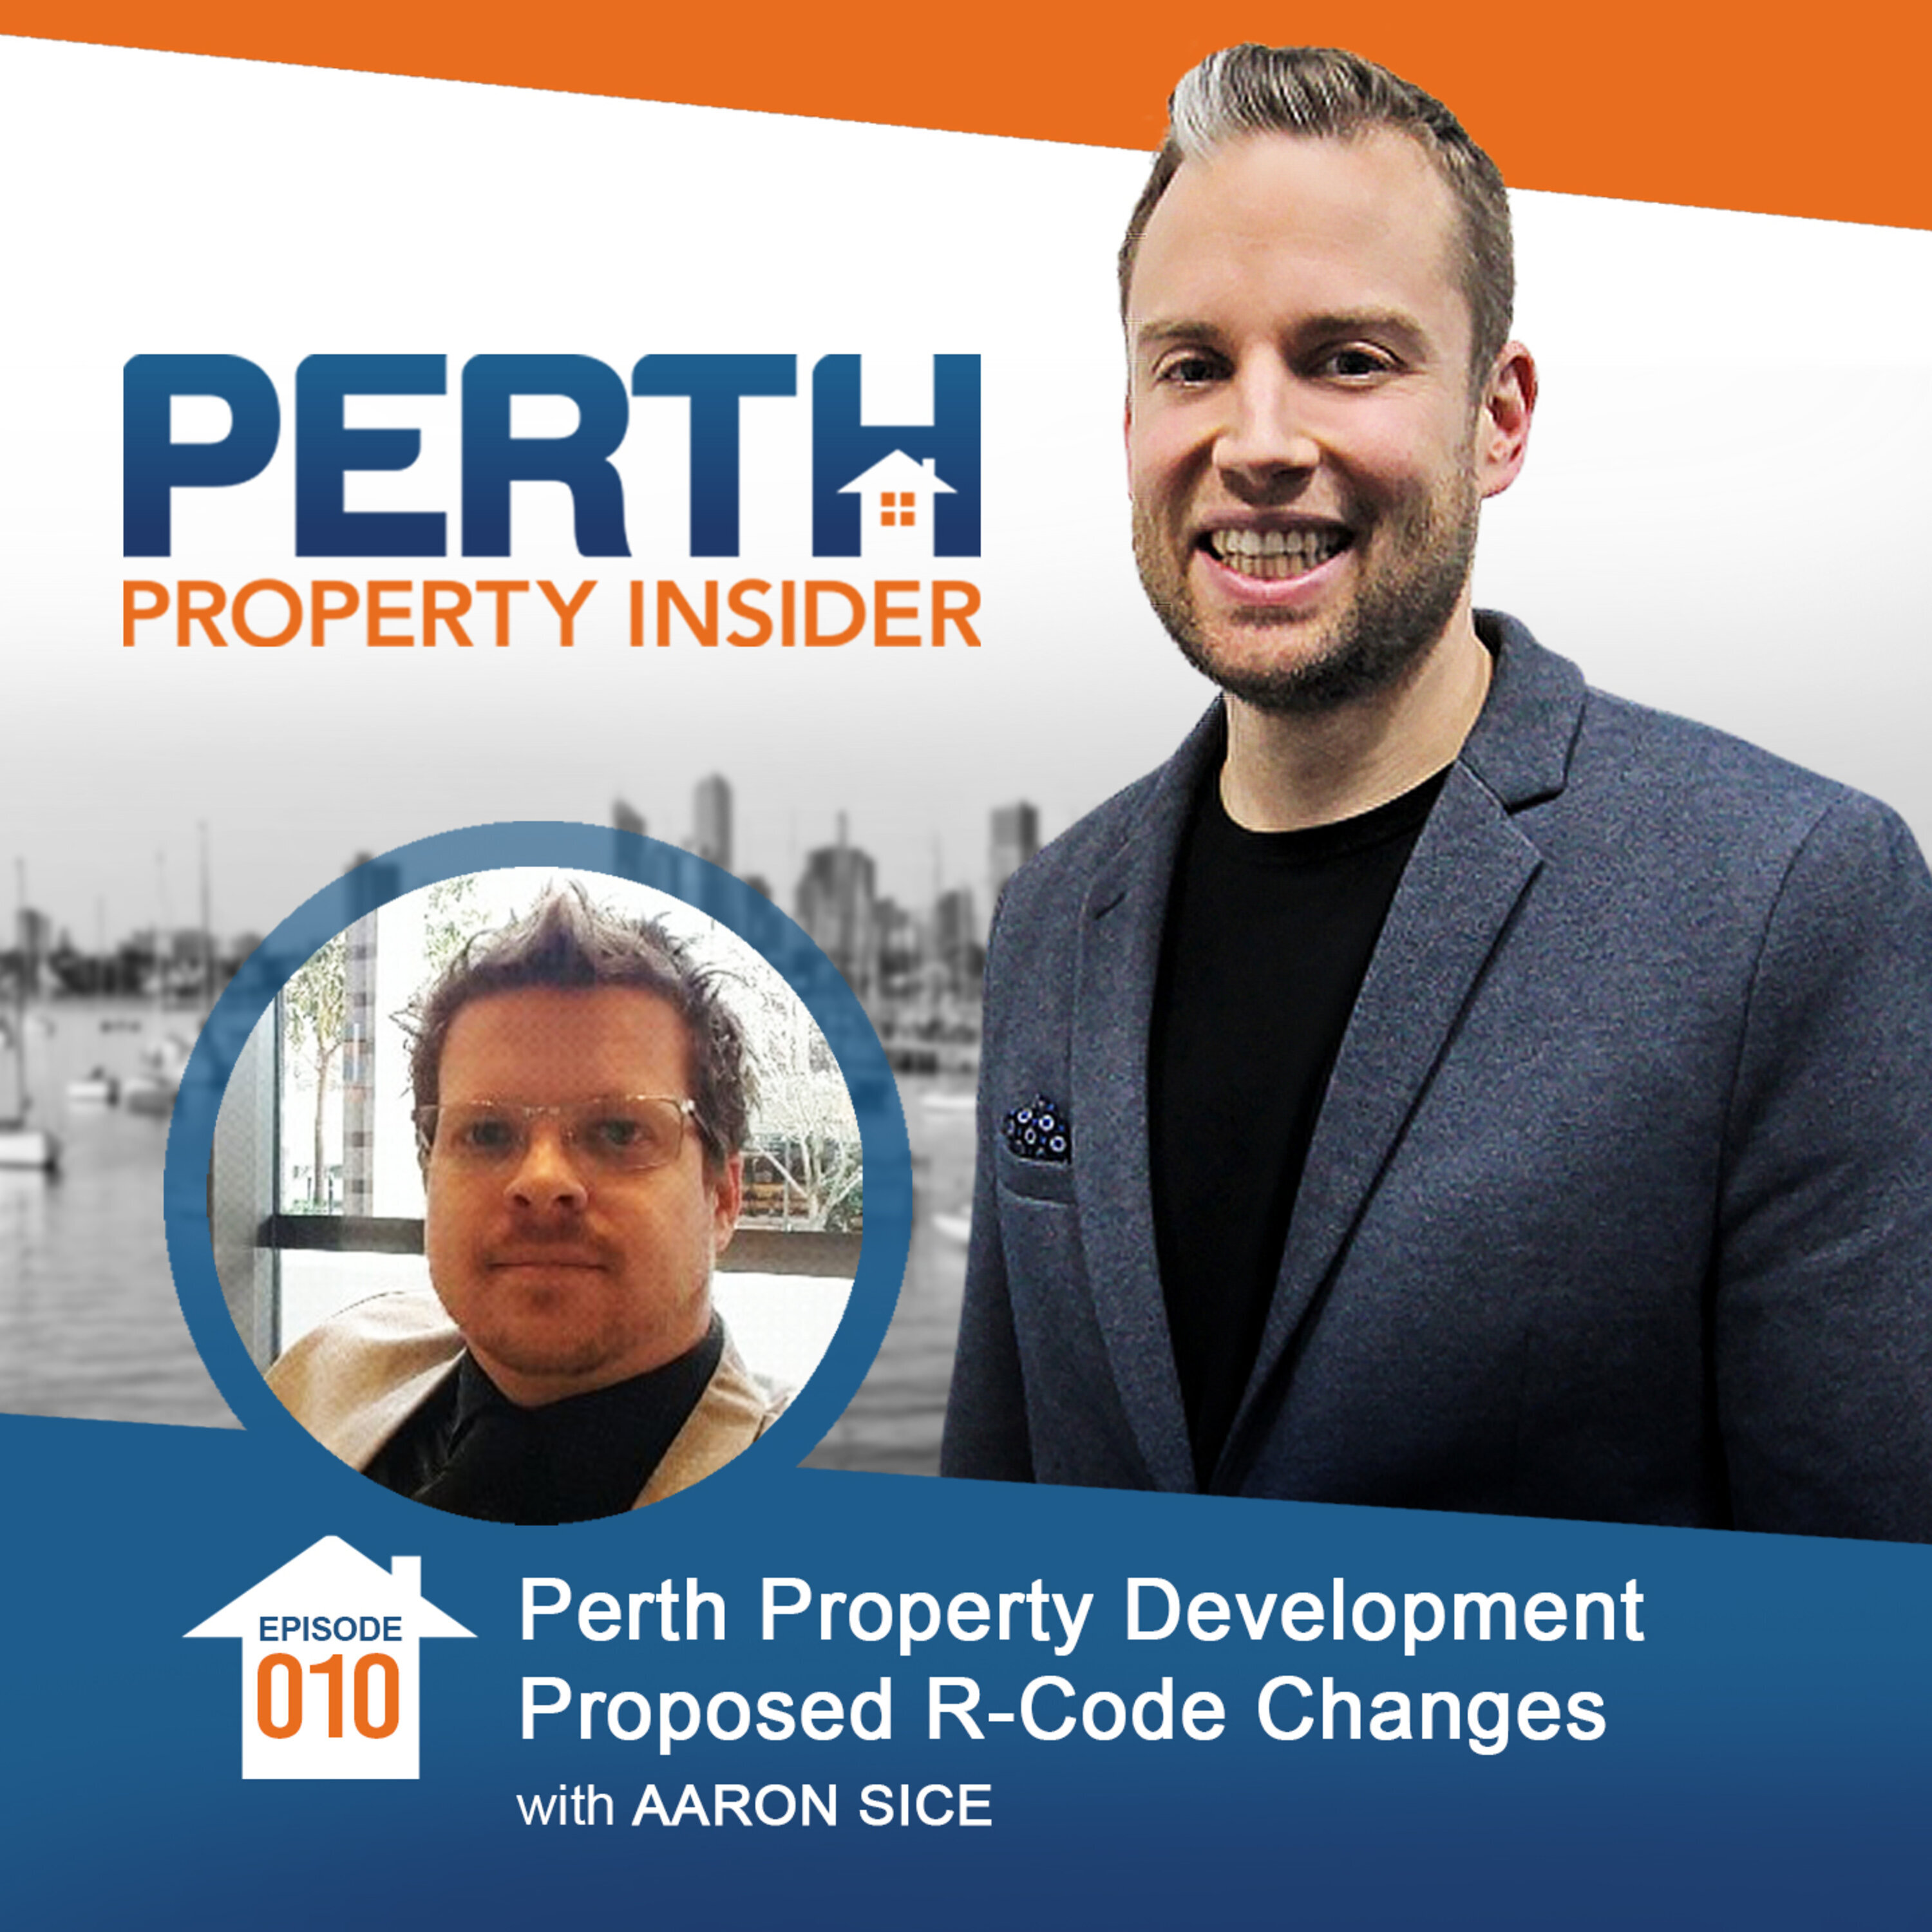 Perth Property Development Proposed R-Code Changes with Aaron Sice